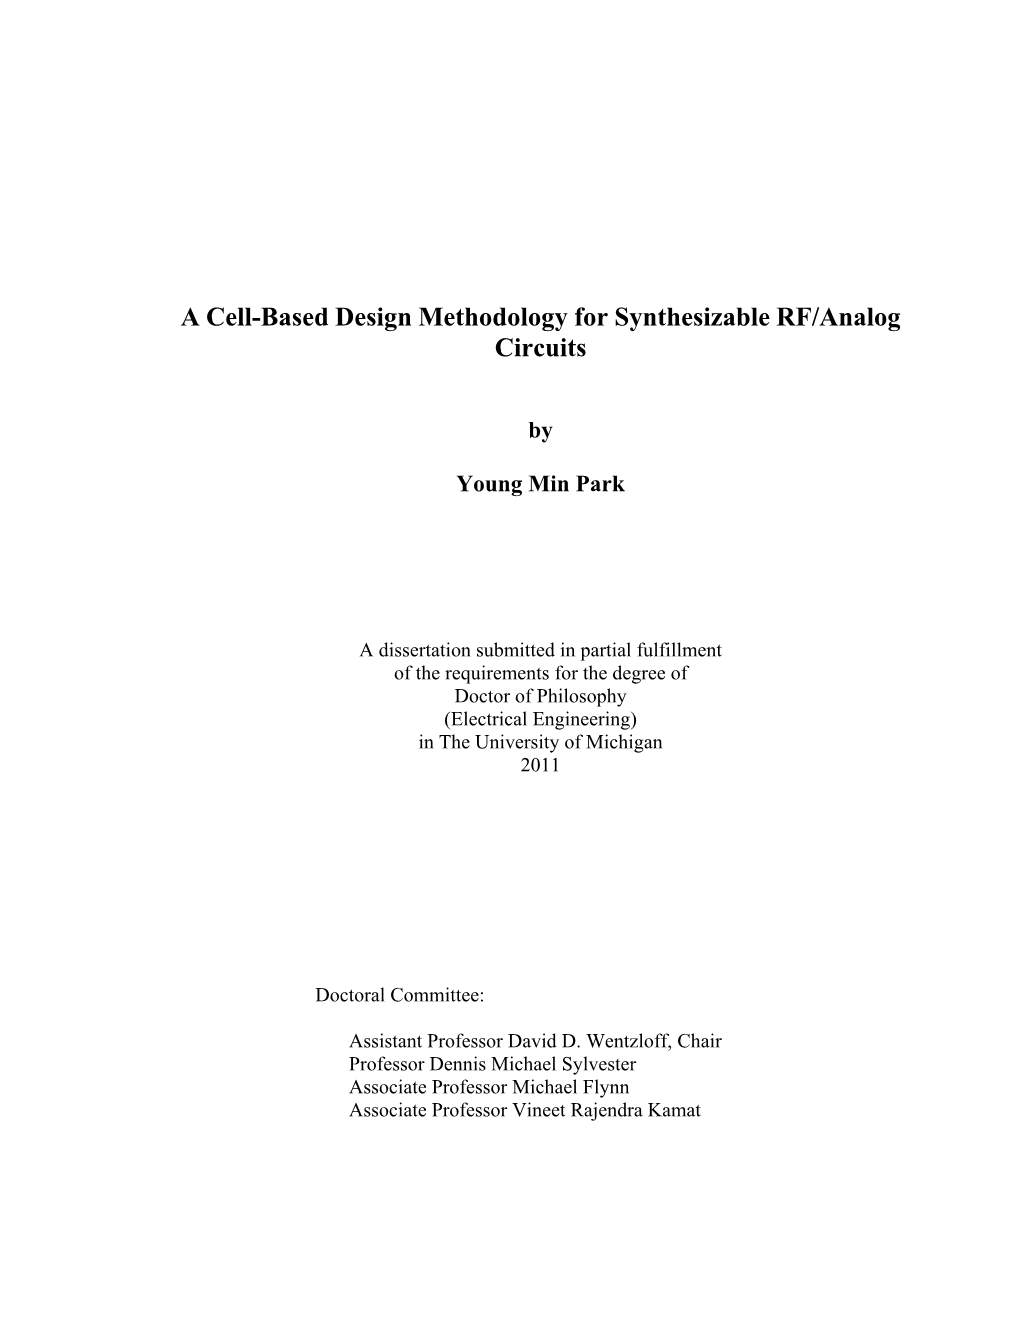 A Cell-Based Design Methodology for Synthesizable RF/Analog Circuits